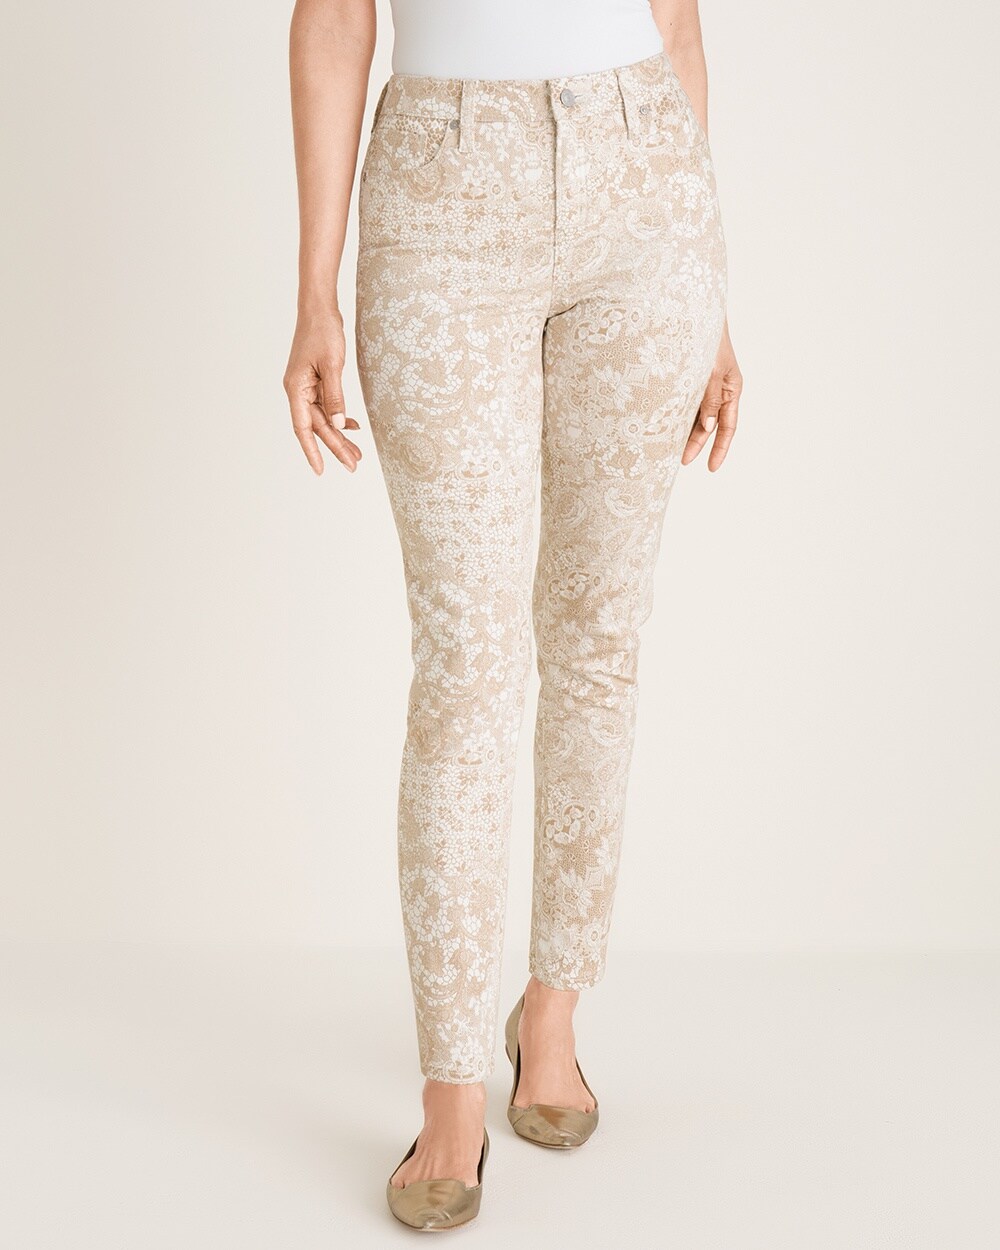 So Slimming Lace-Print Girlfriend Ankle Jeans